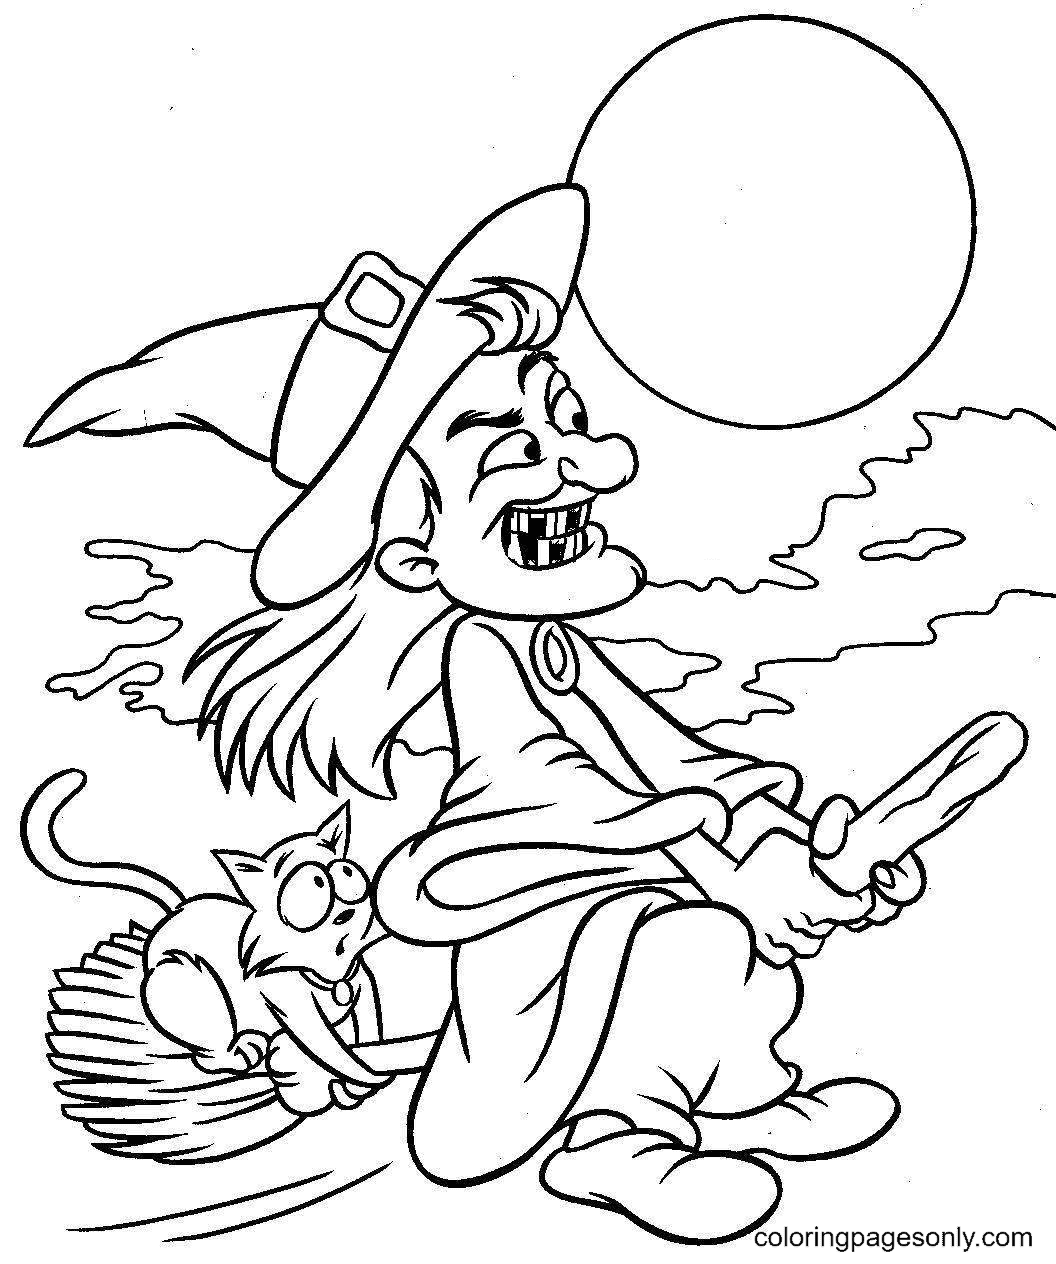 The Witch and The Black Cat on the Flying Broom Coloring Pages